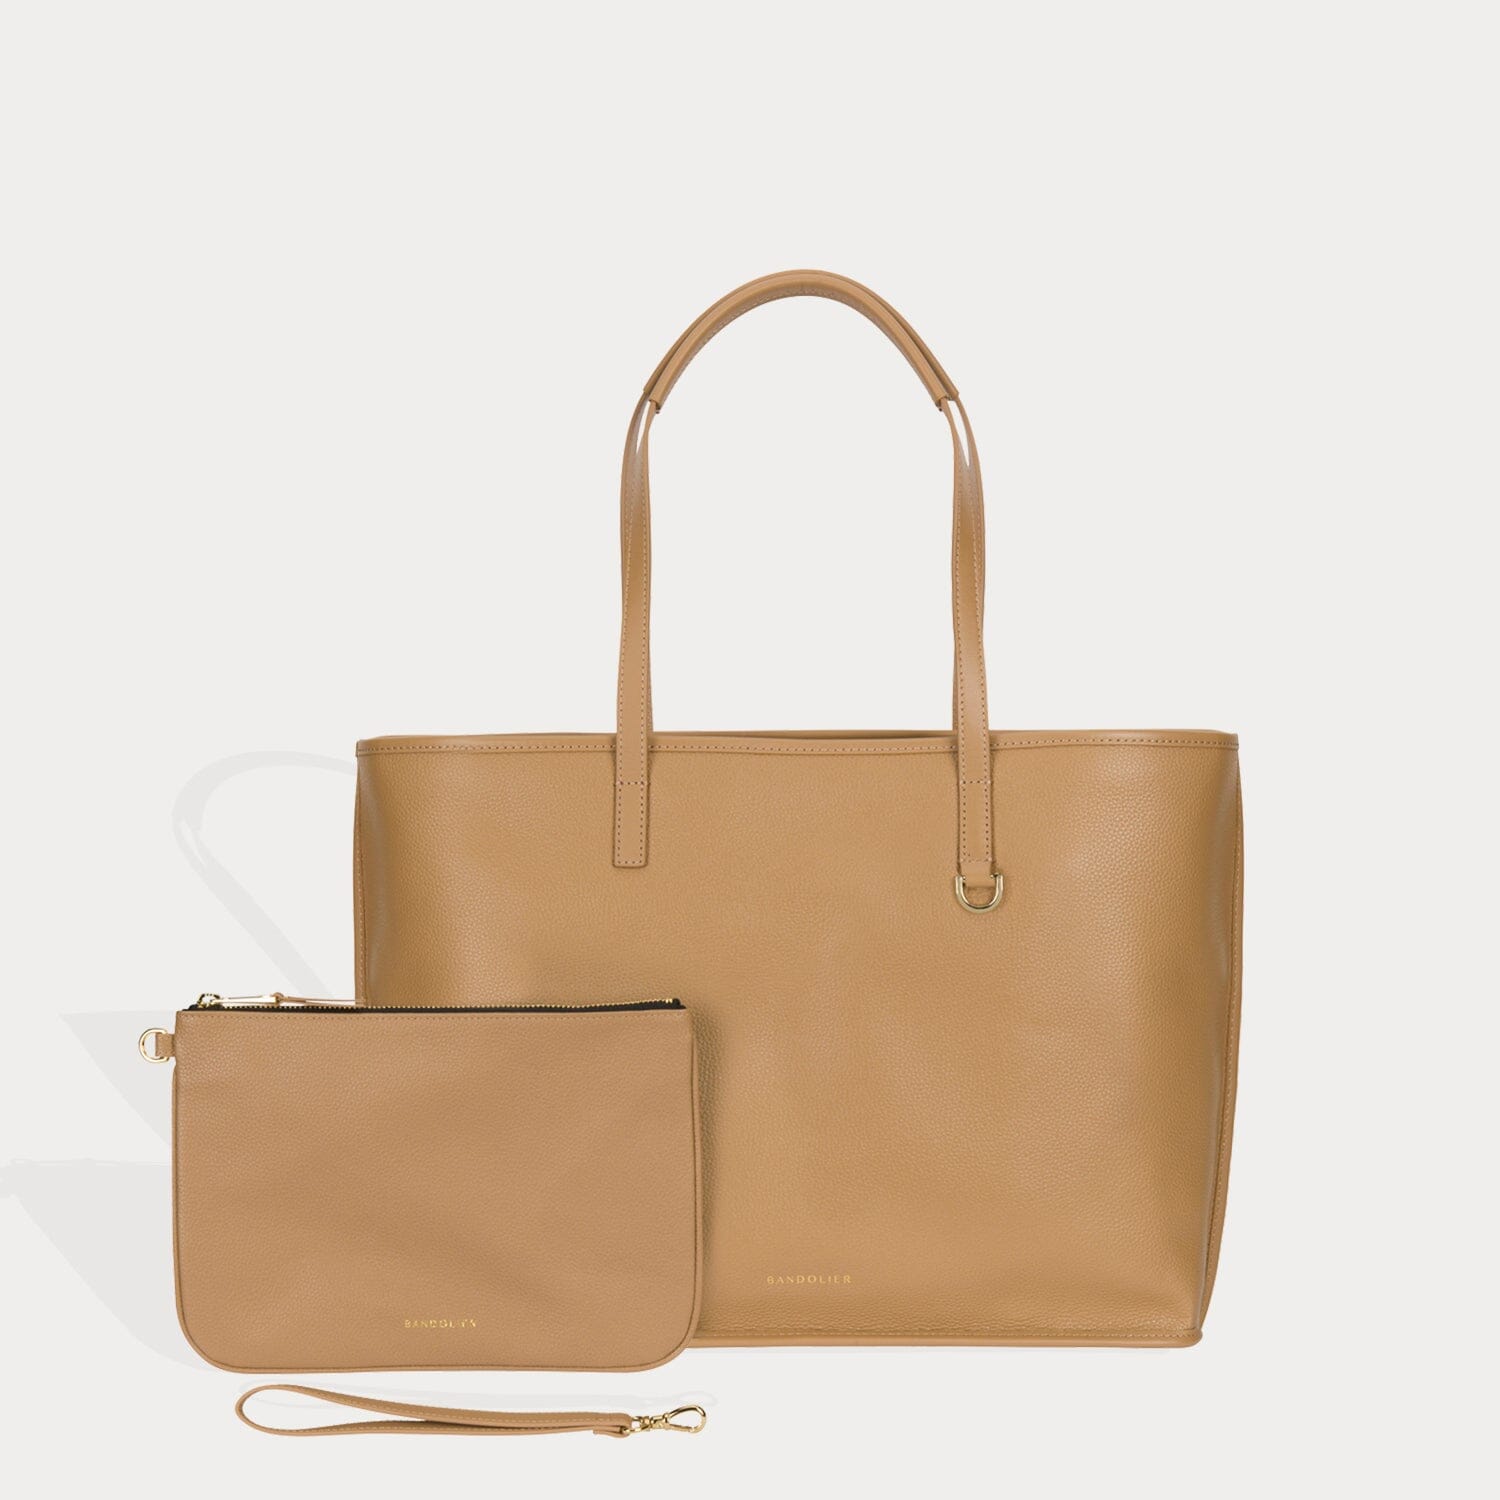 Tote and Clutch Set - Tan/Gold pack Bandolier 